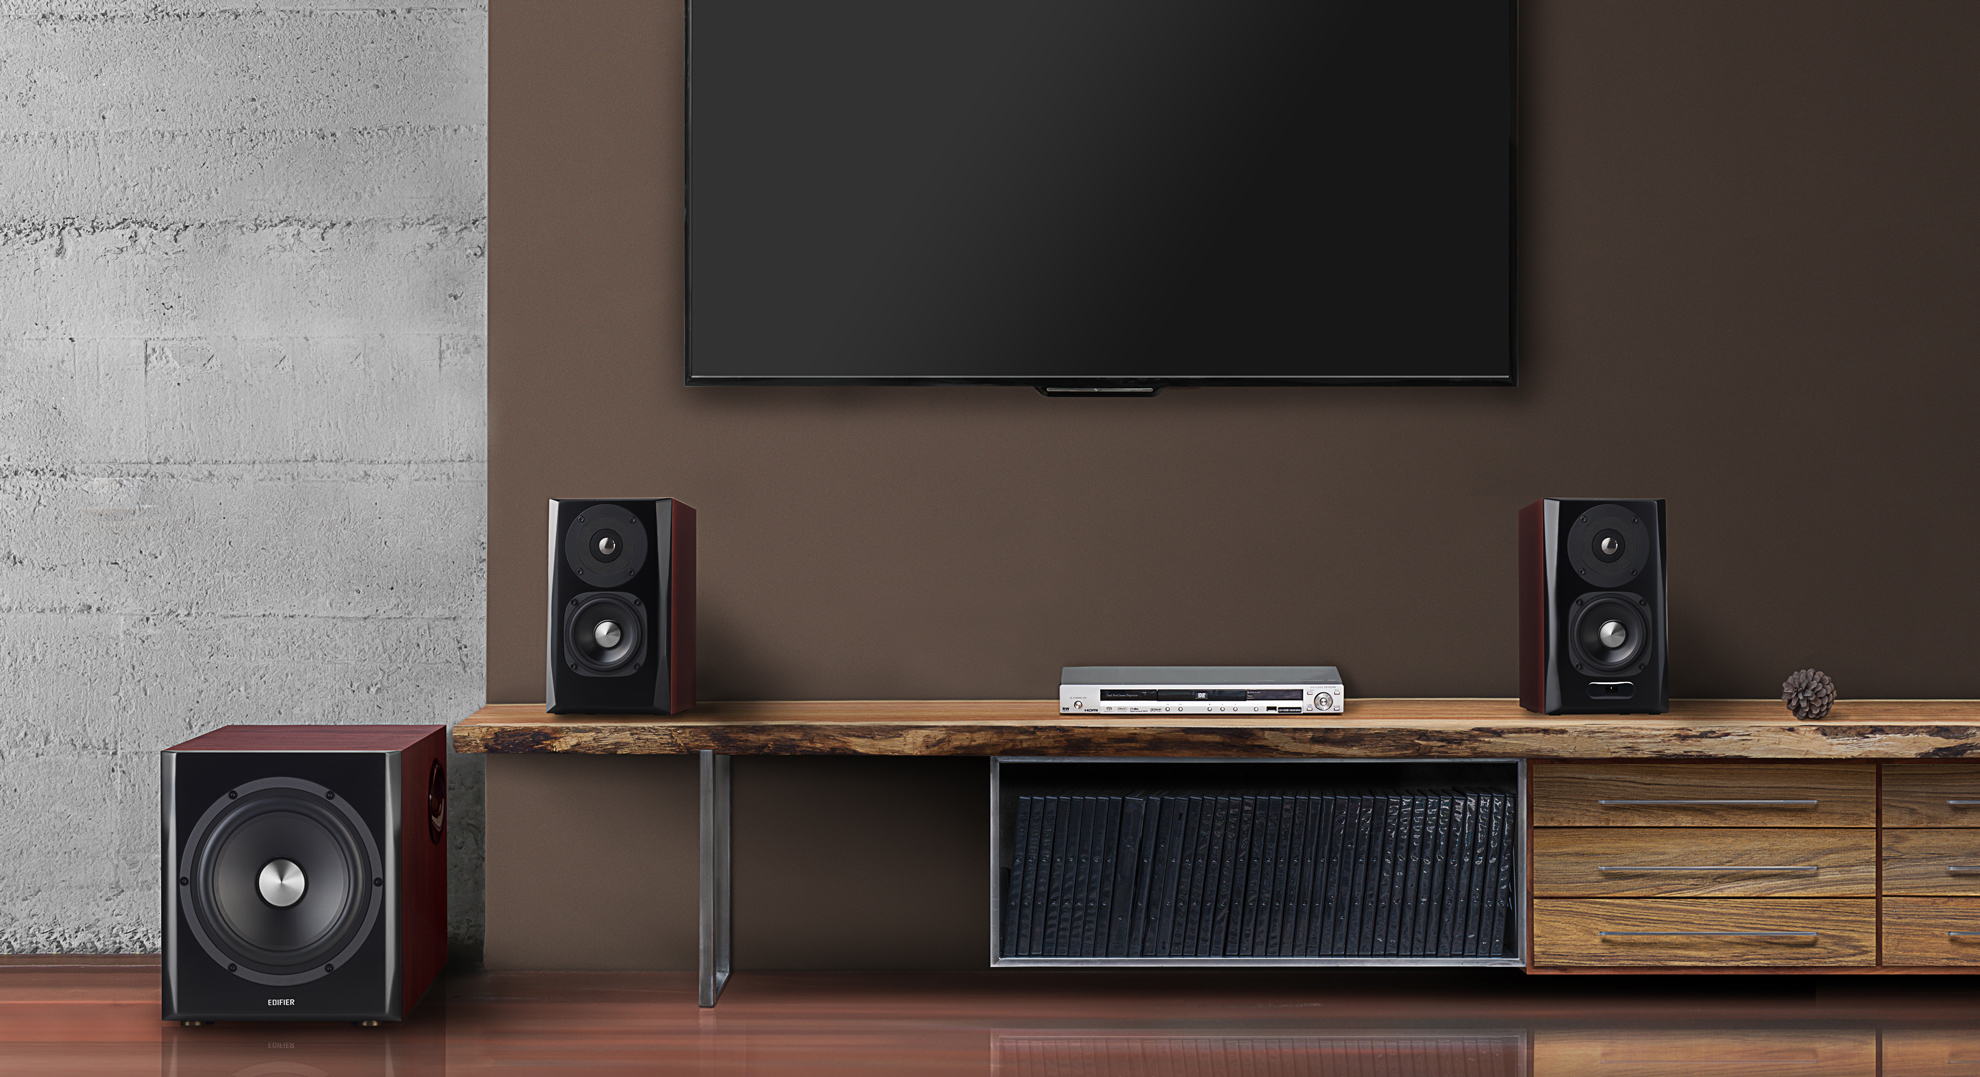 Edifier S350DB speakers set next to a TV